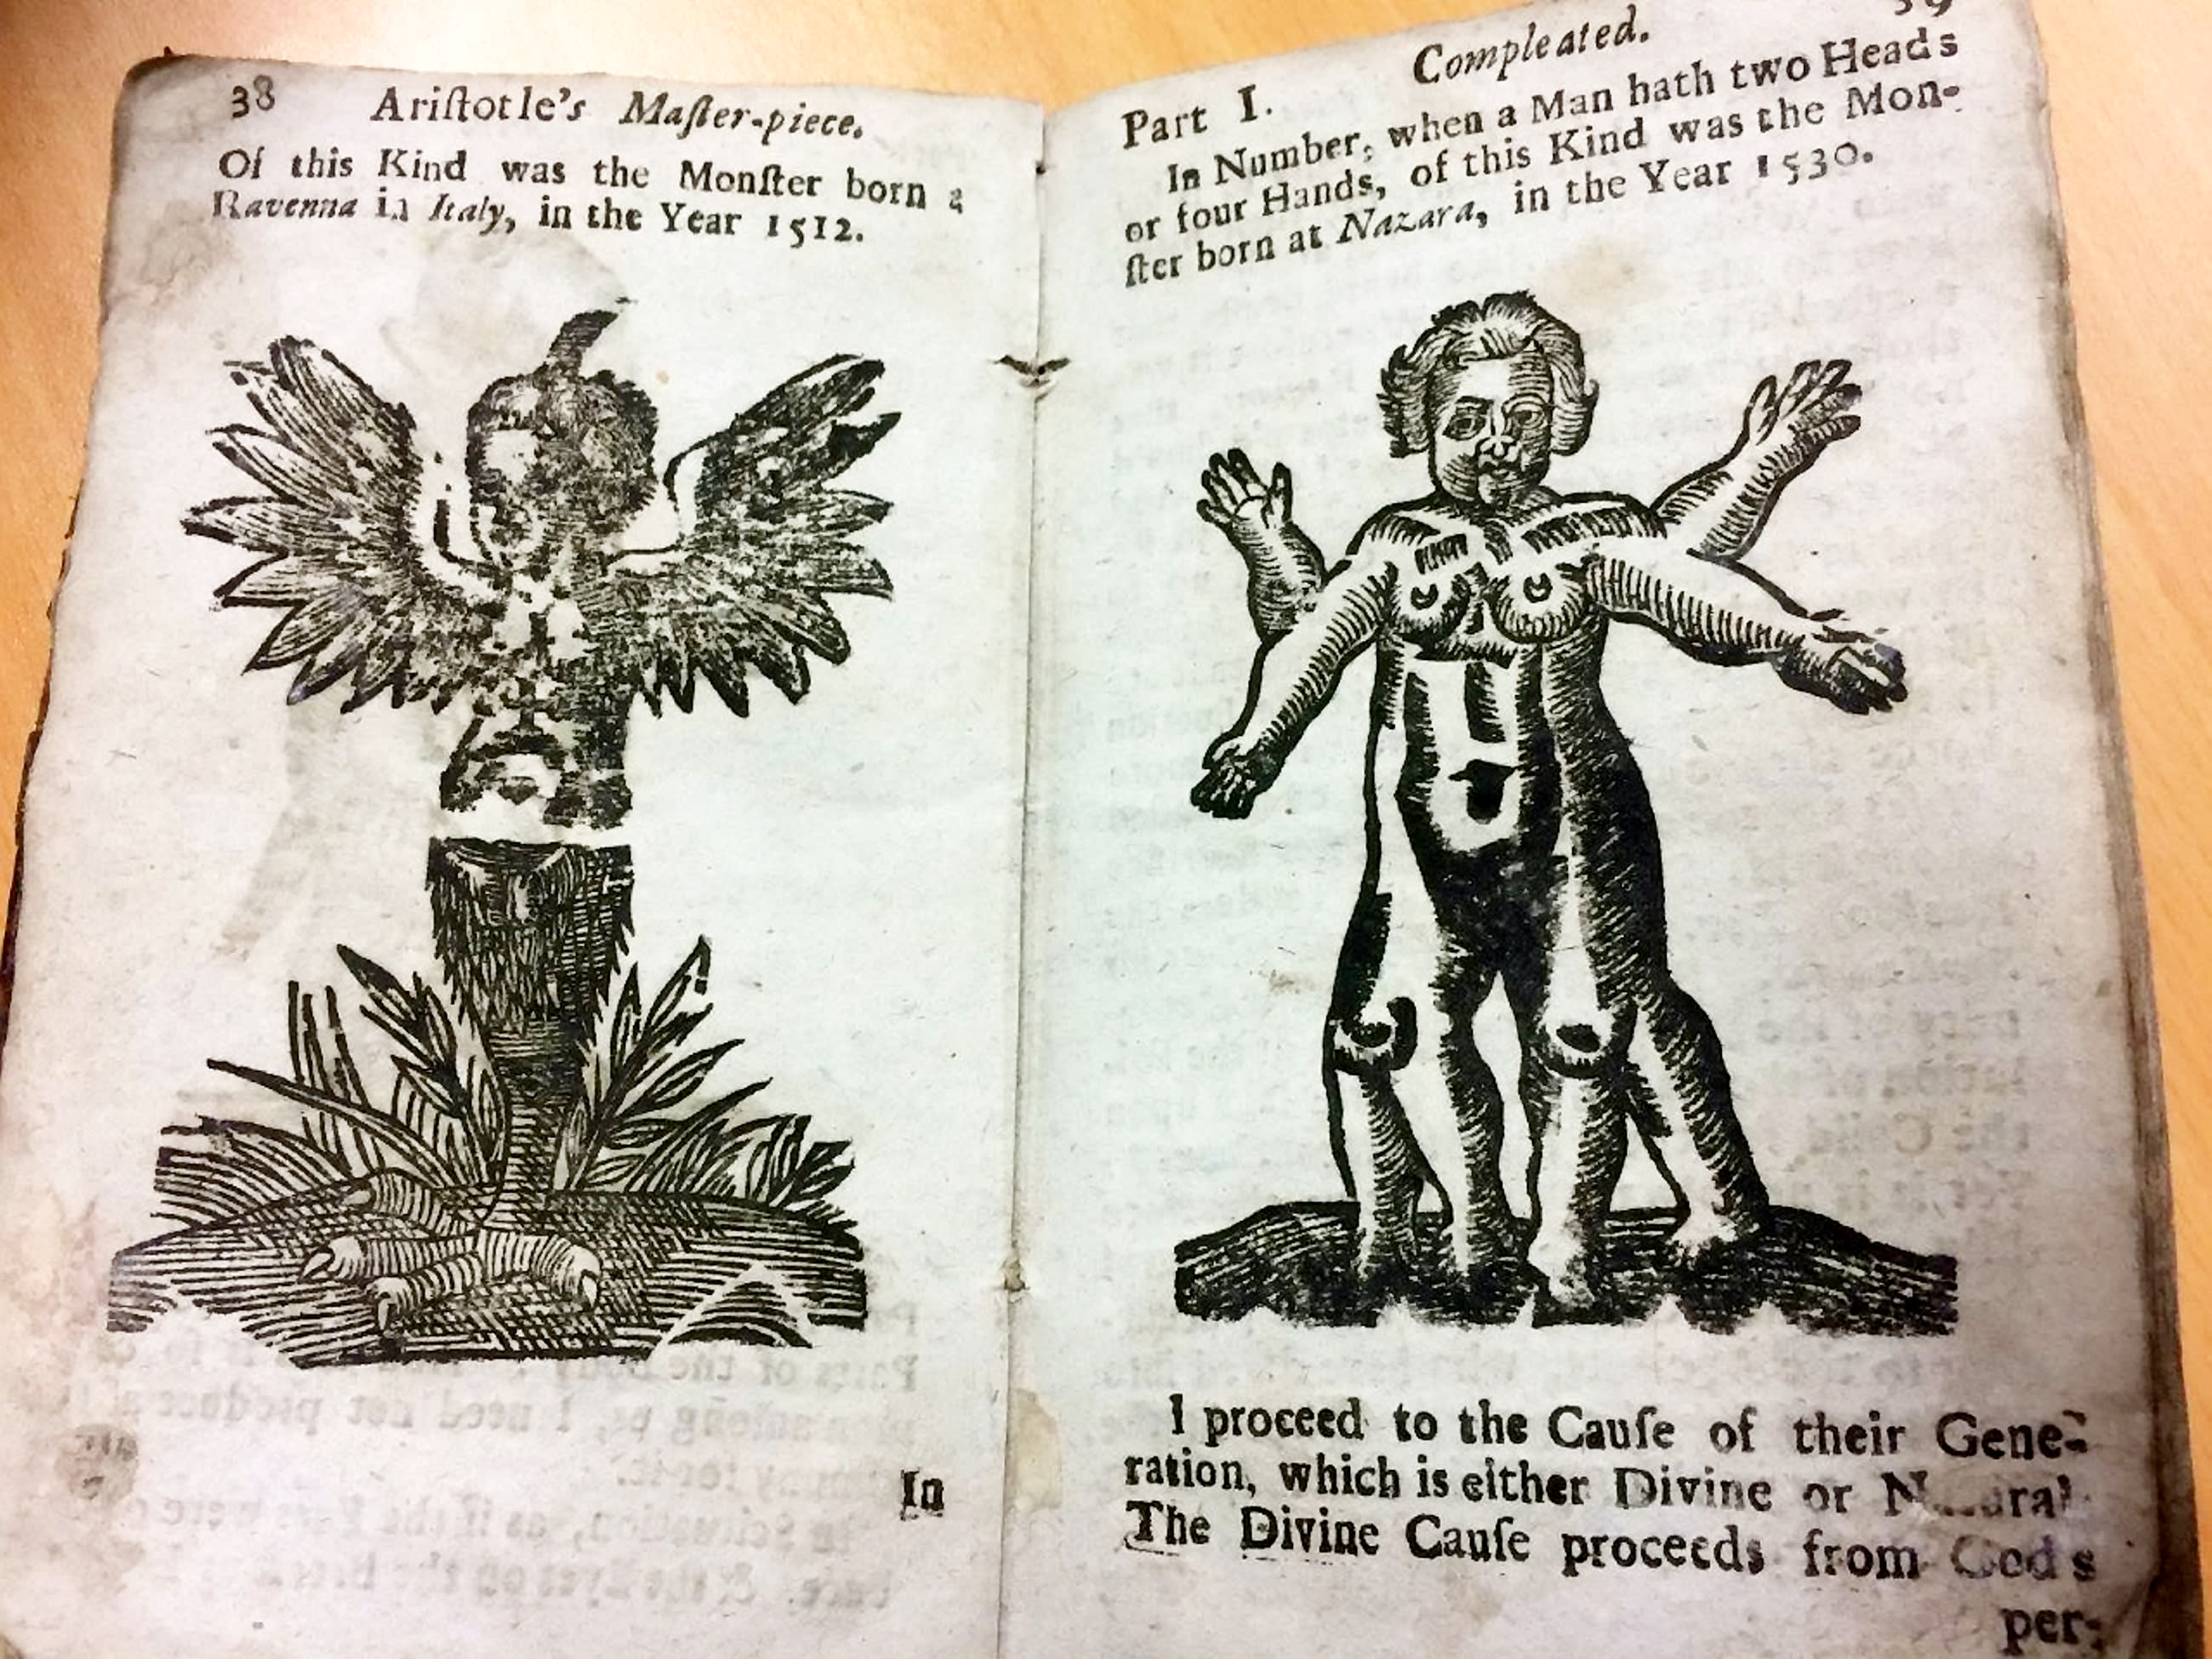 Rare 18th Century Sex Manual Unearthed After Being